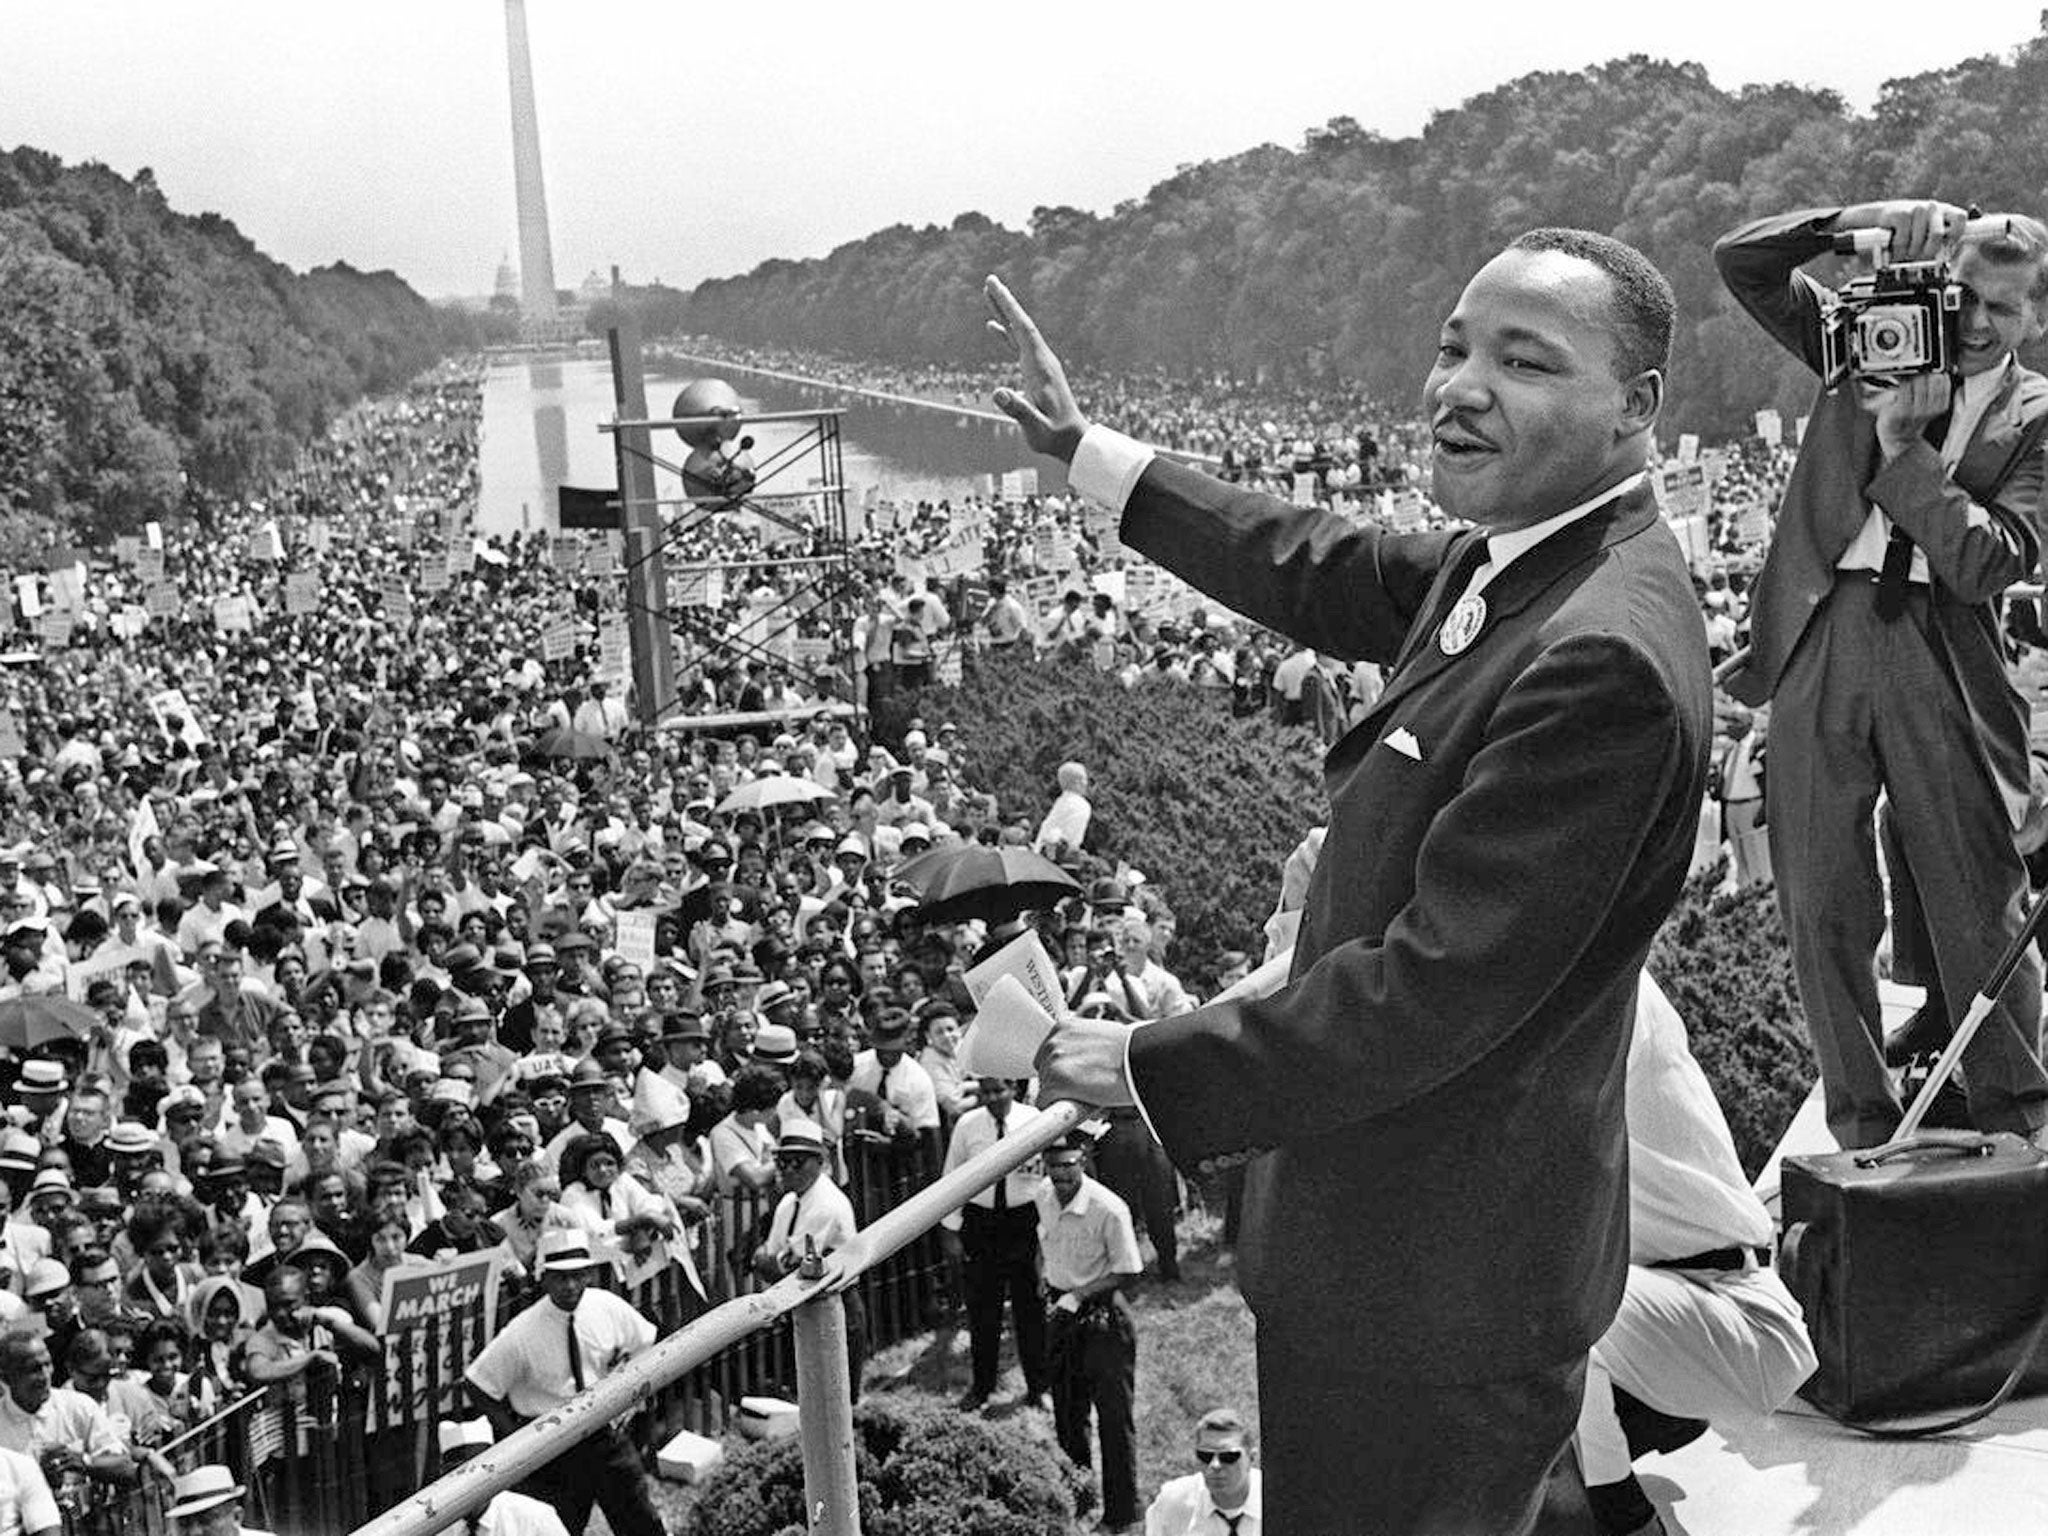 Dr King on the Mall in Washington in August 1963, at the time of his ‘I Have a Dream’ speech campaigning for racial equality